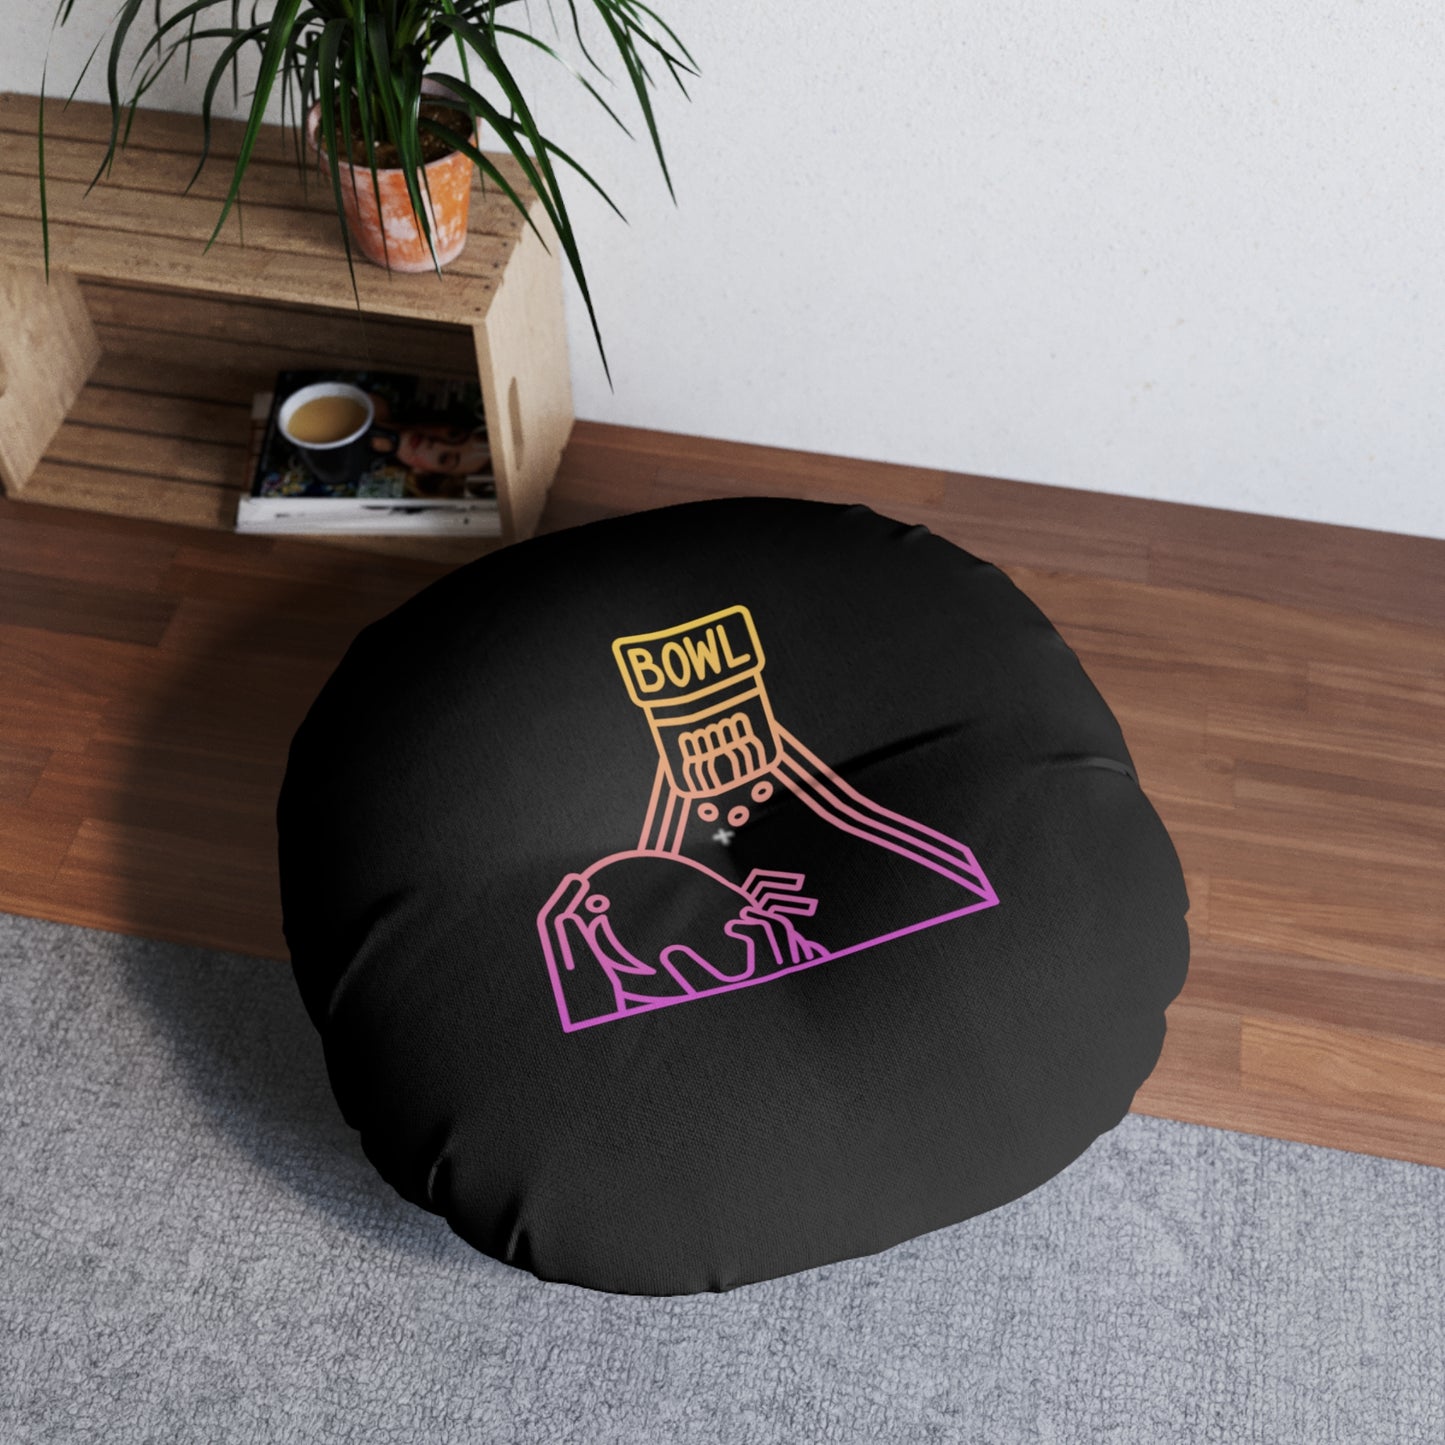 Tufted Floor Pillow, Round: Bowling Black